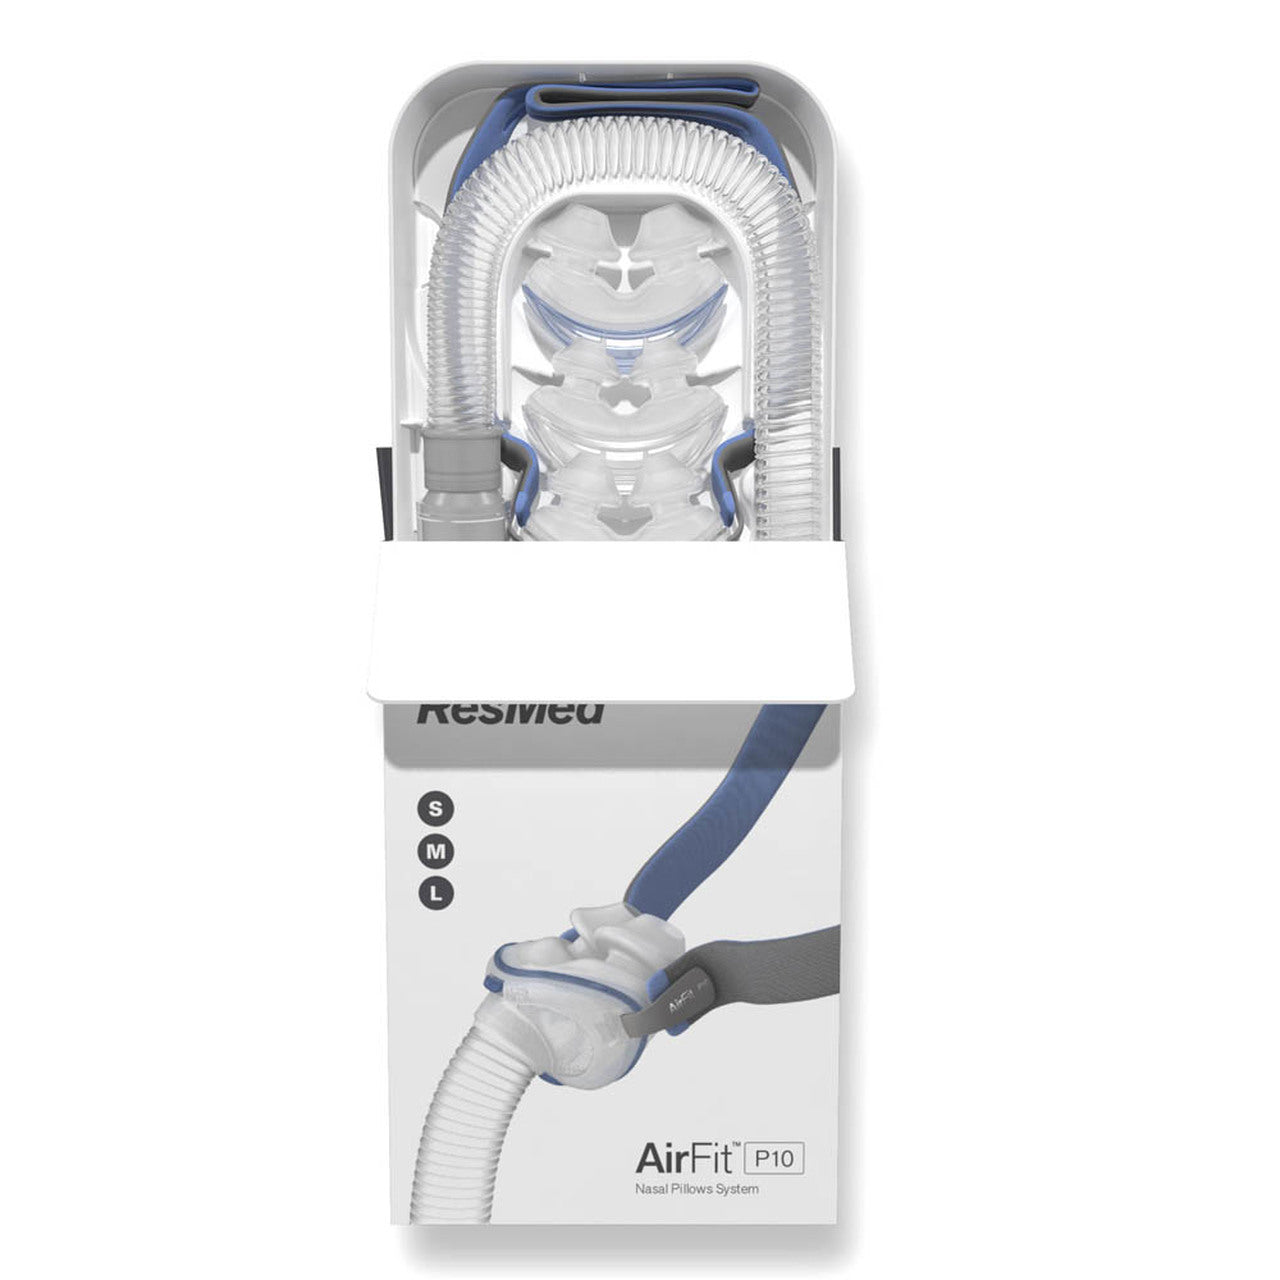 Airfit P10 in its packaging